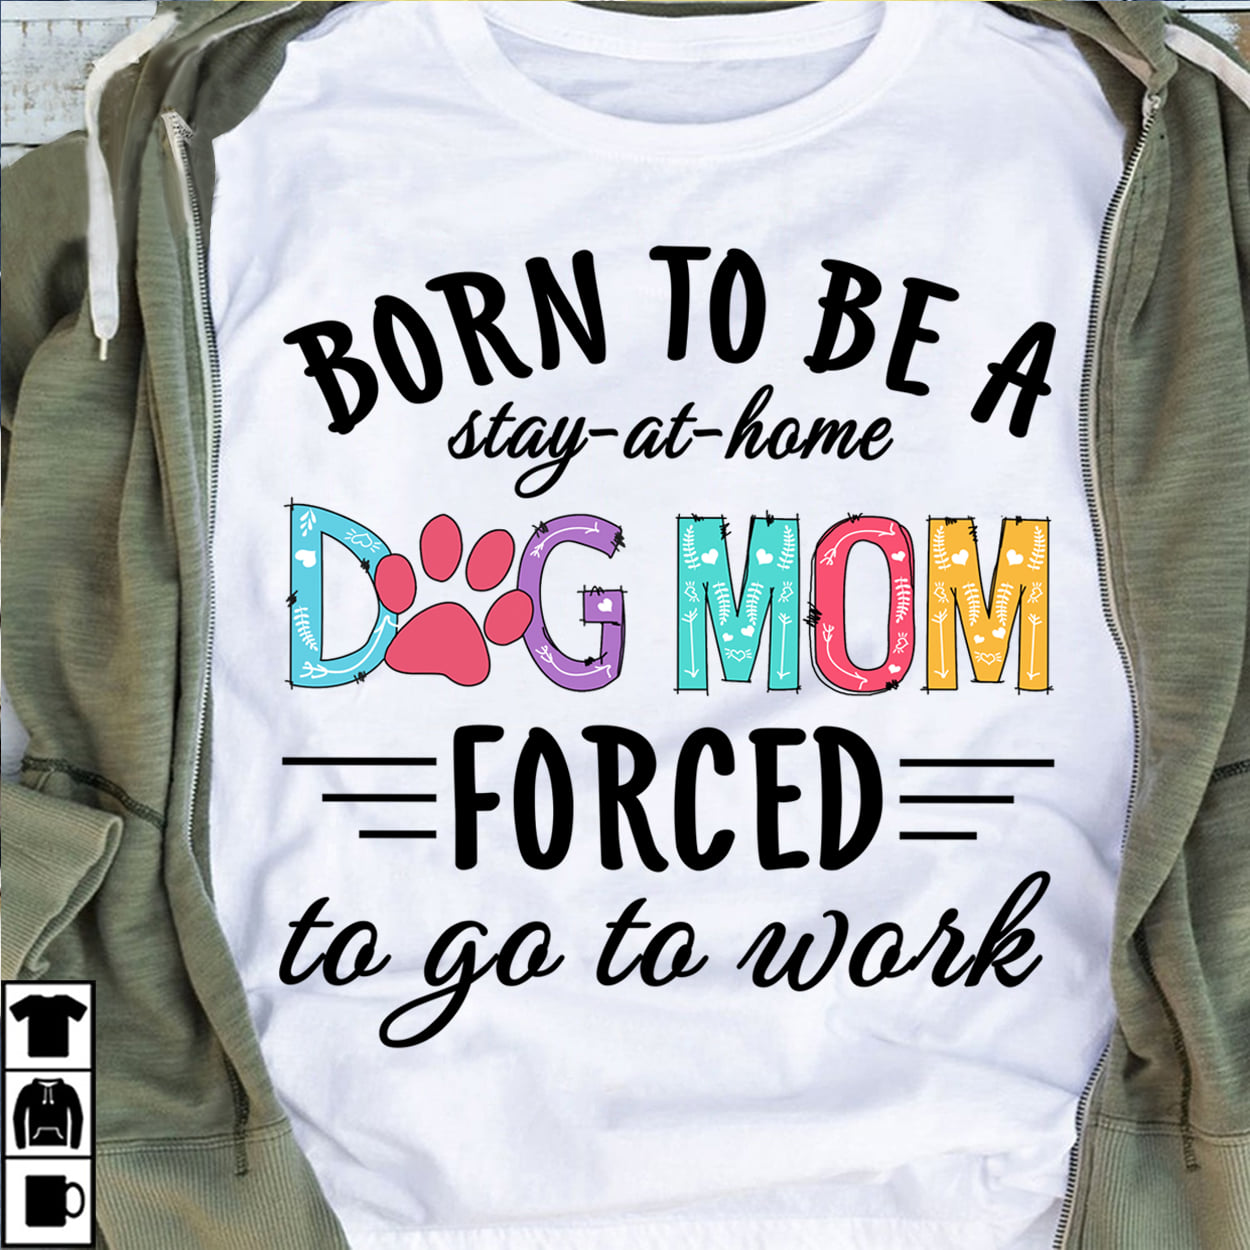 Born to be a stay at home dog mom forced to go to work